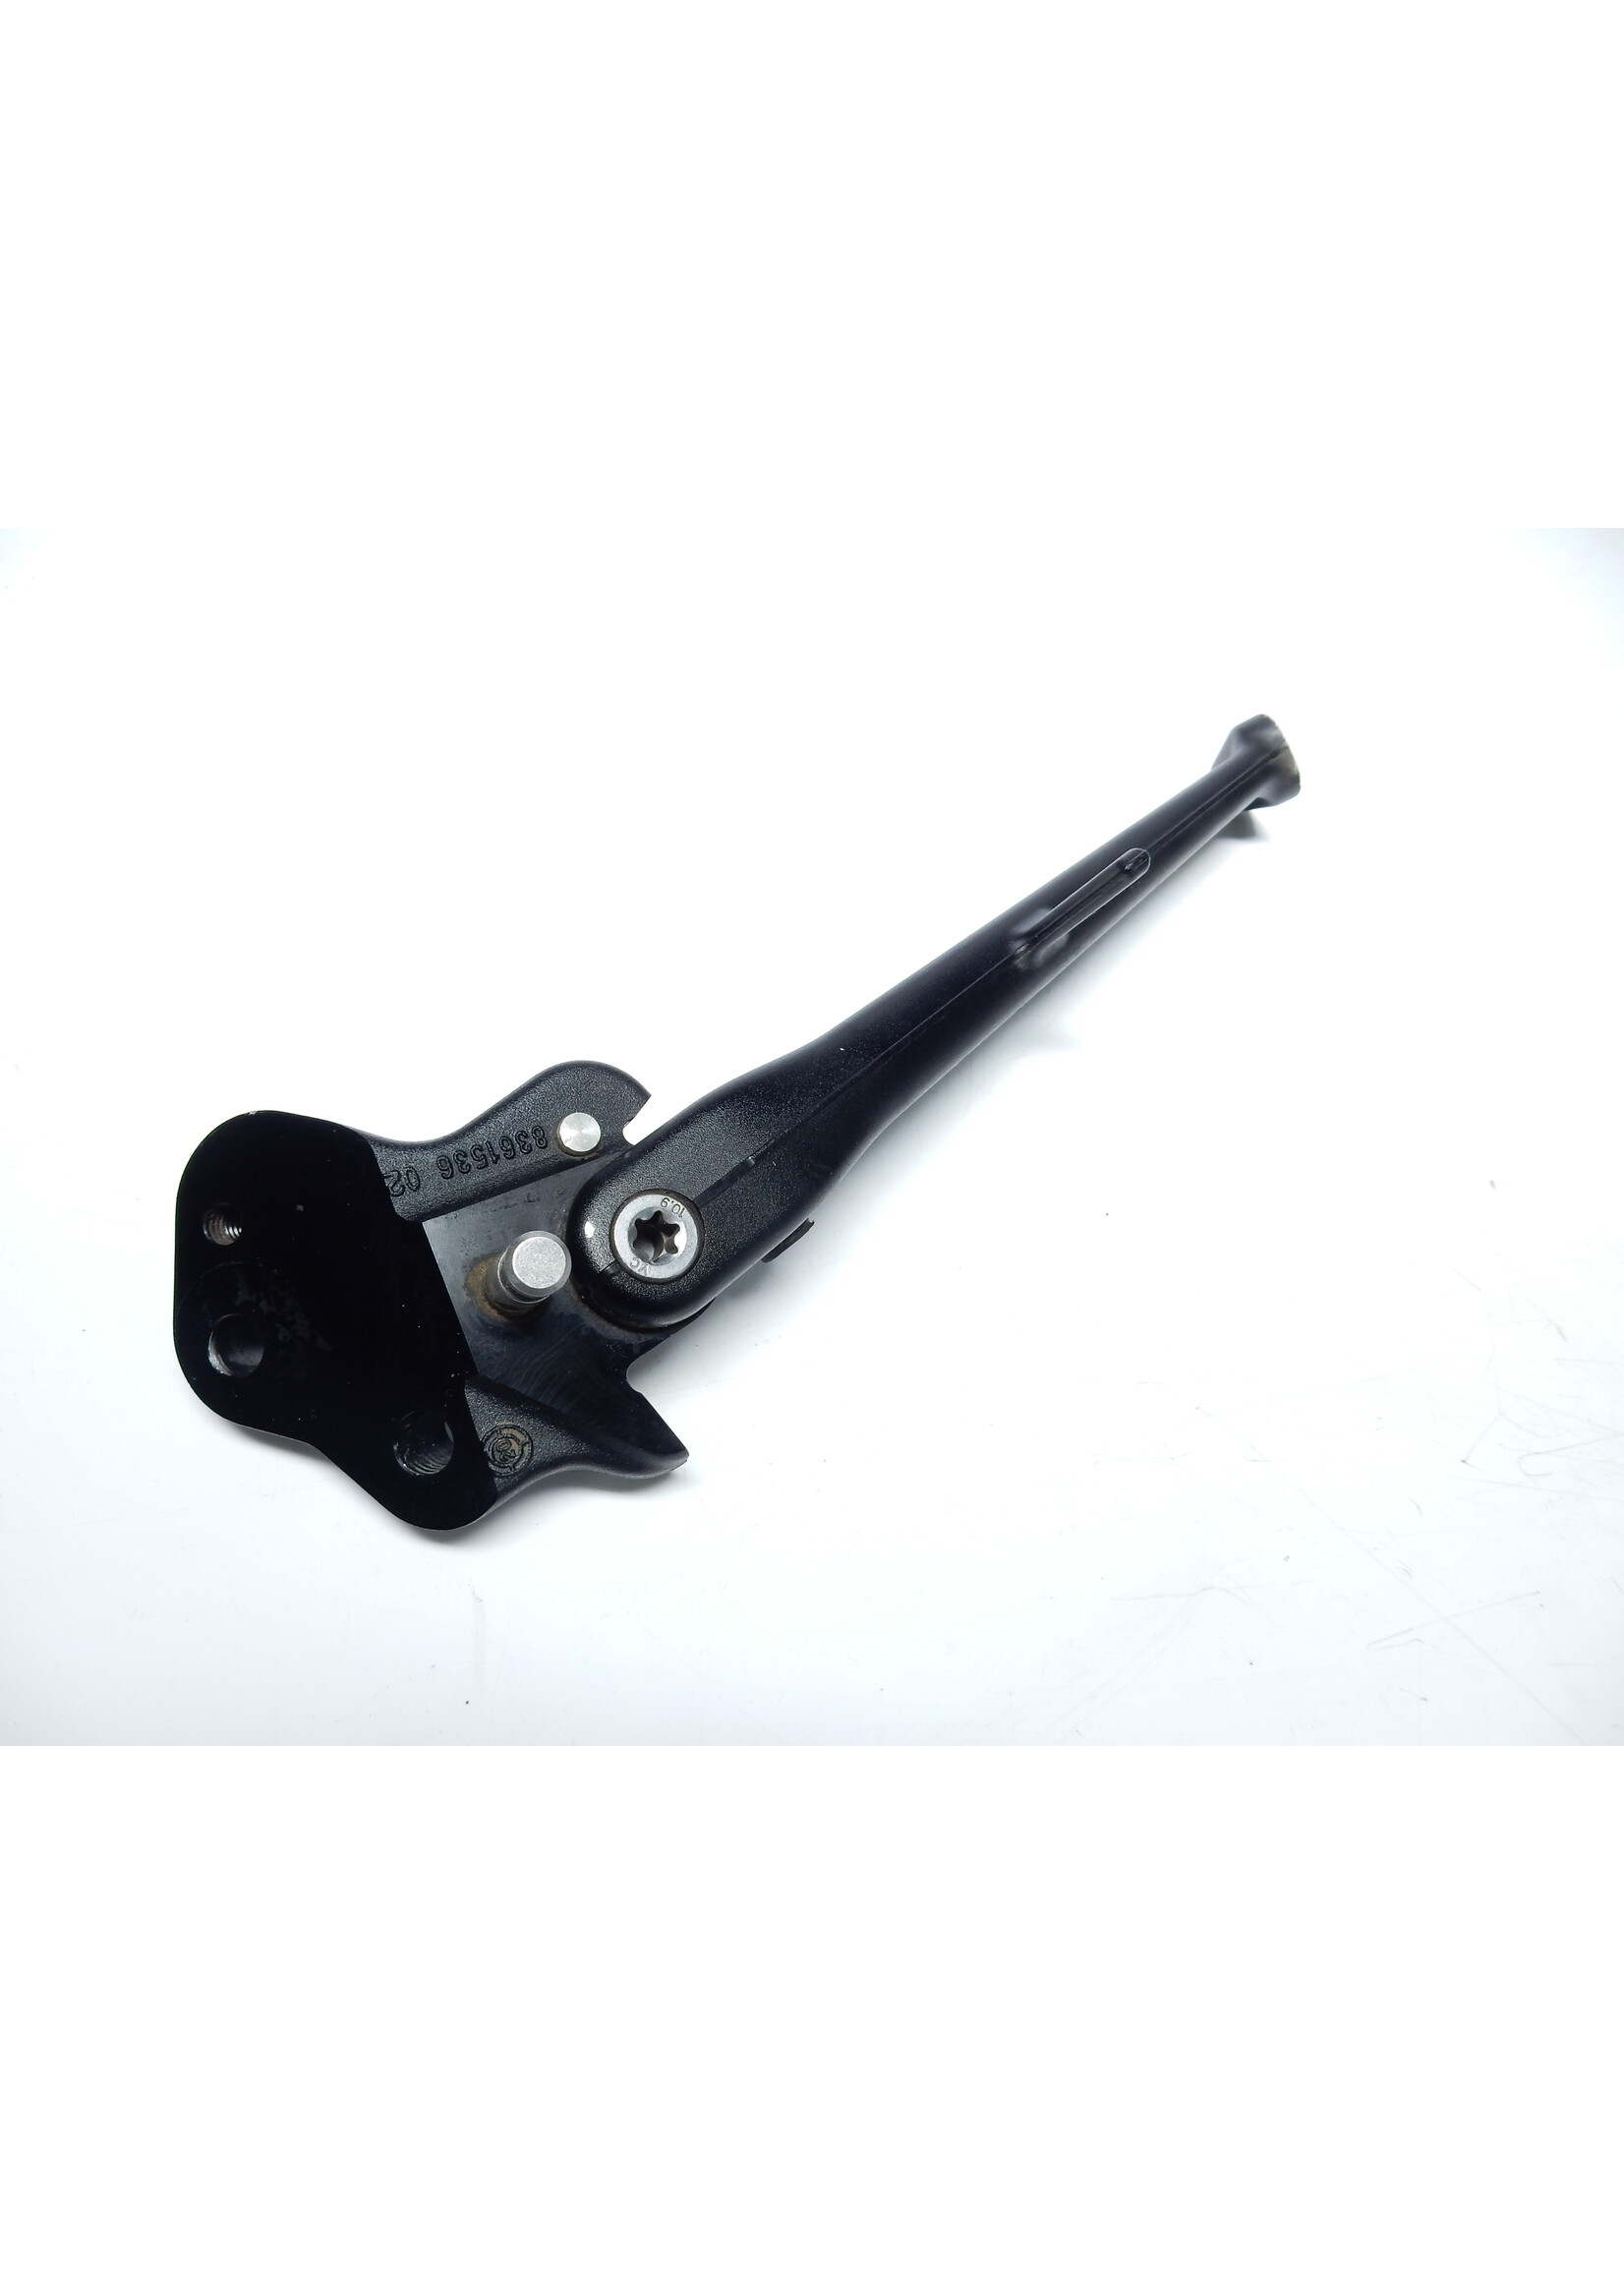 BMW BMW S 1000 R Side stand / Supporting bracket f side stand / 46539467713 / 46538373657